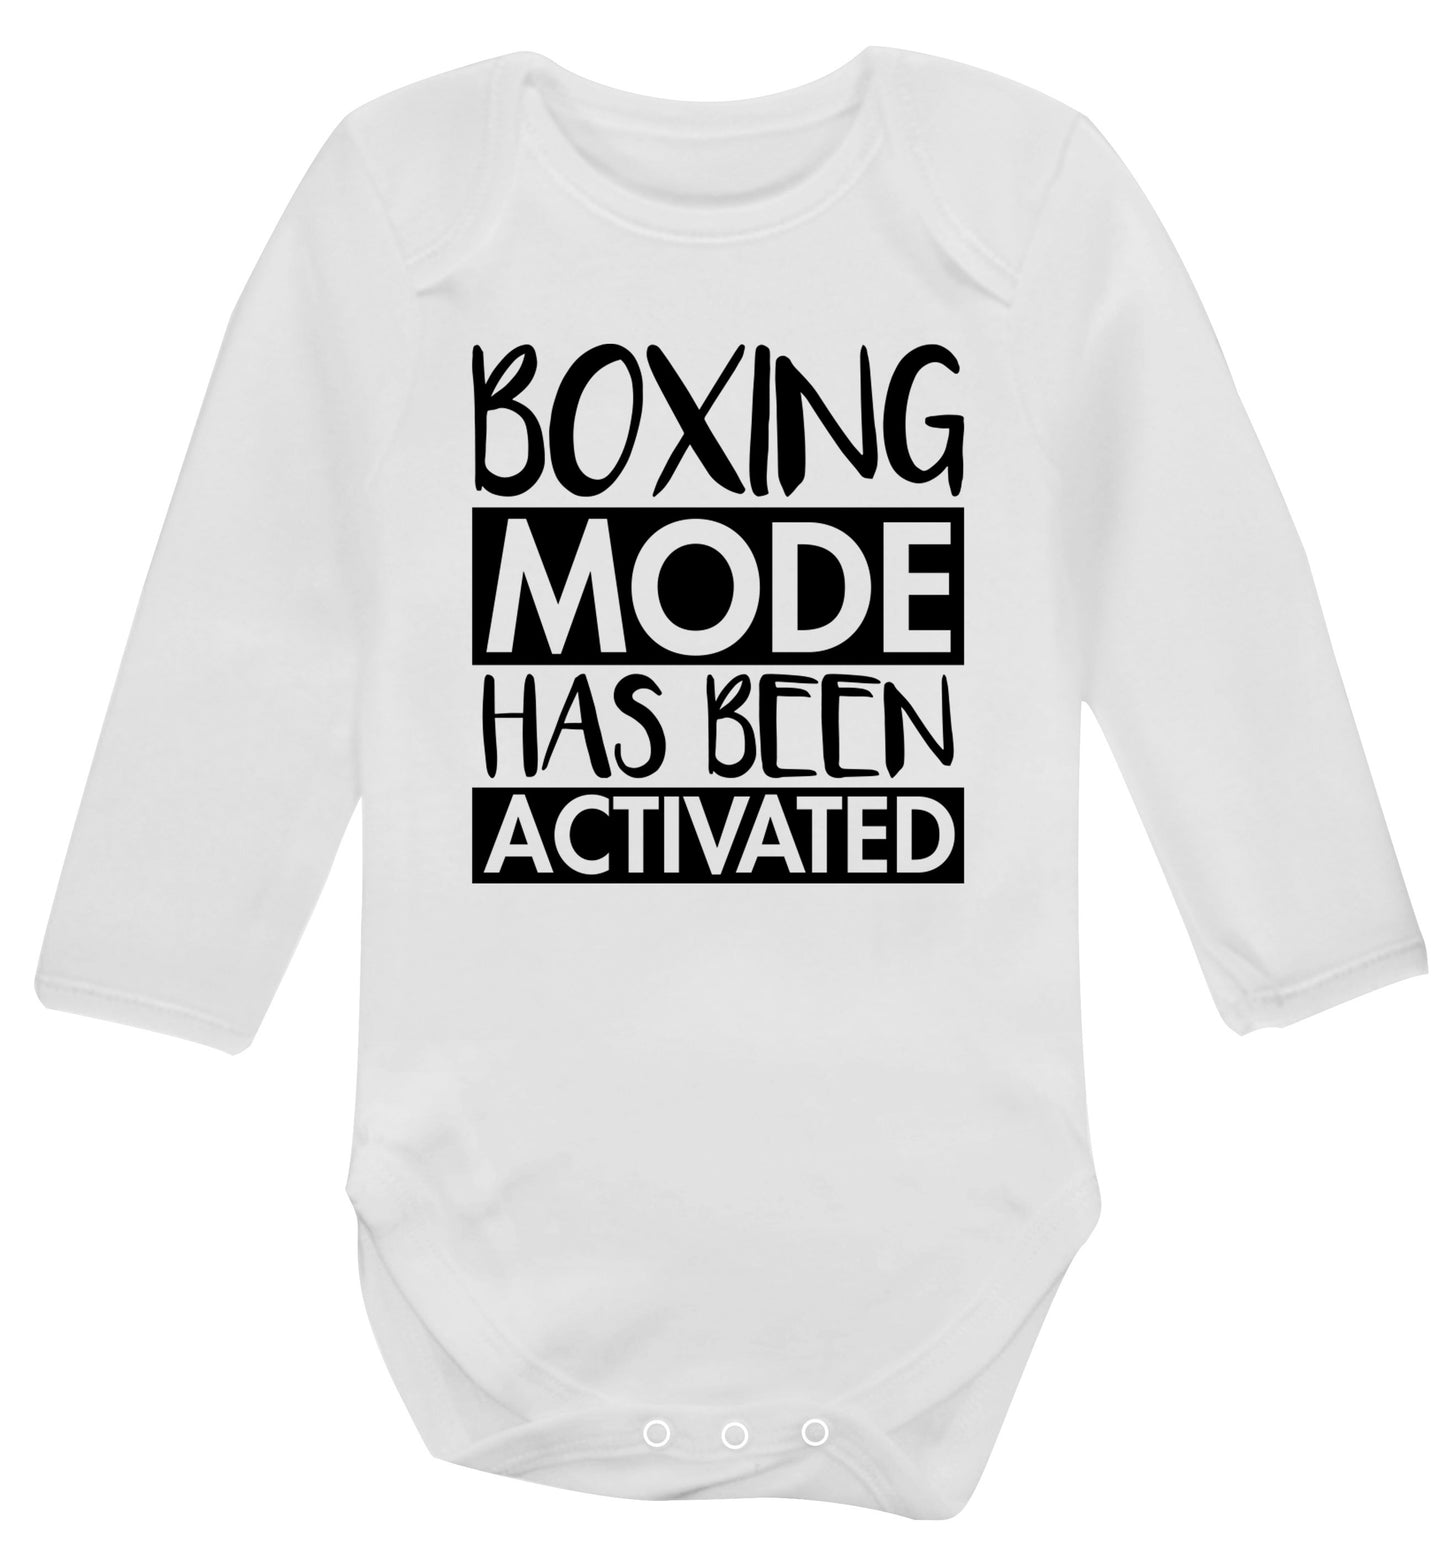 Boxing mode activated Baby Vest long sleeved white 6-12 months